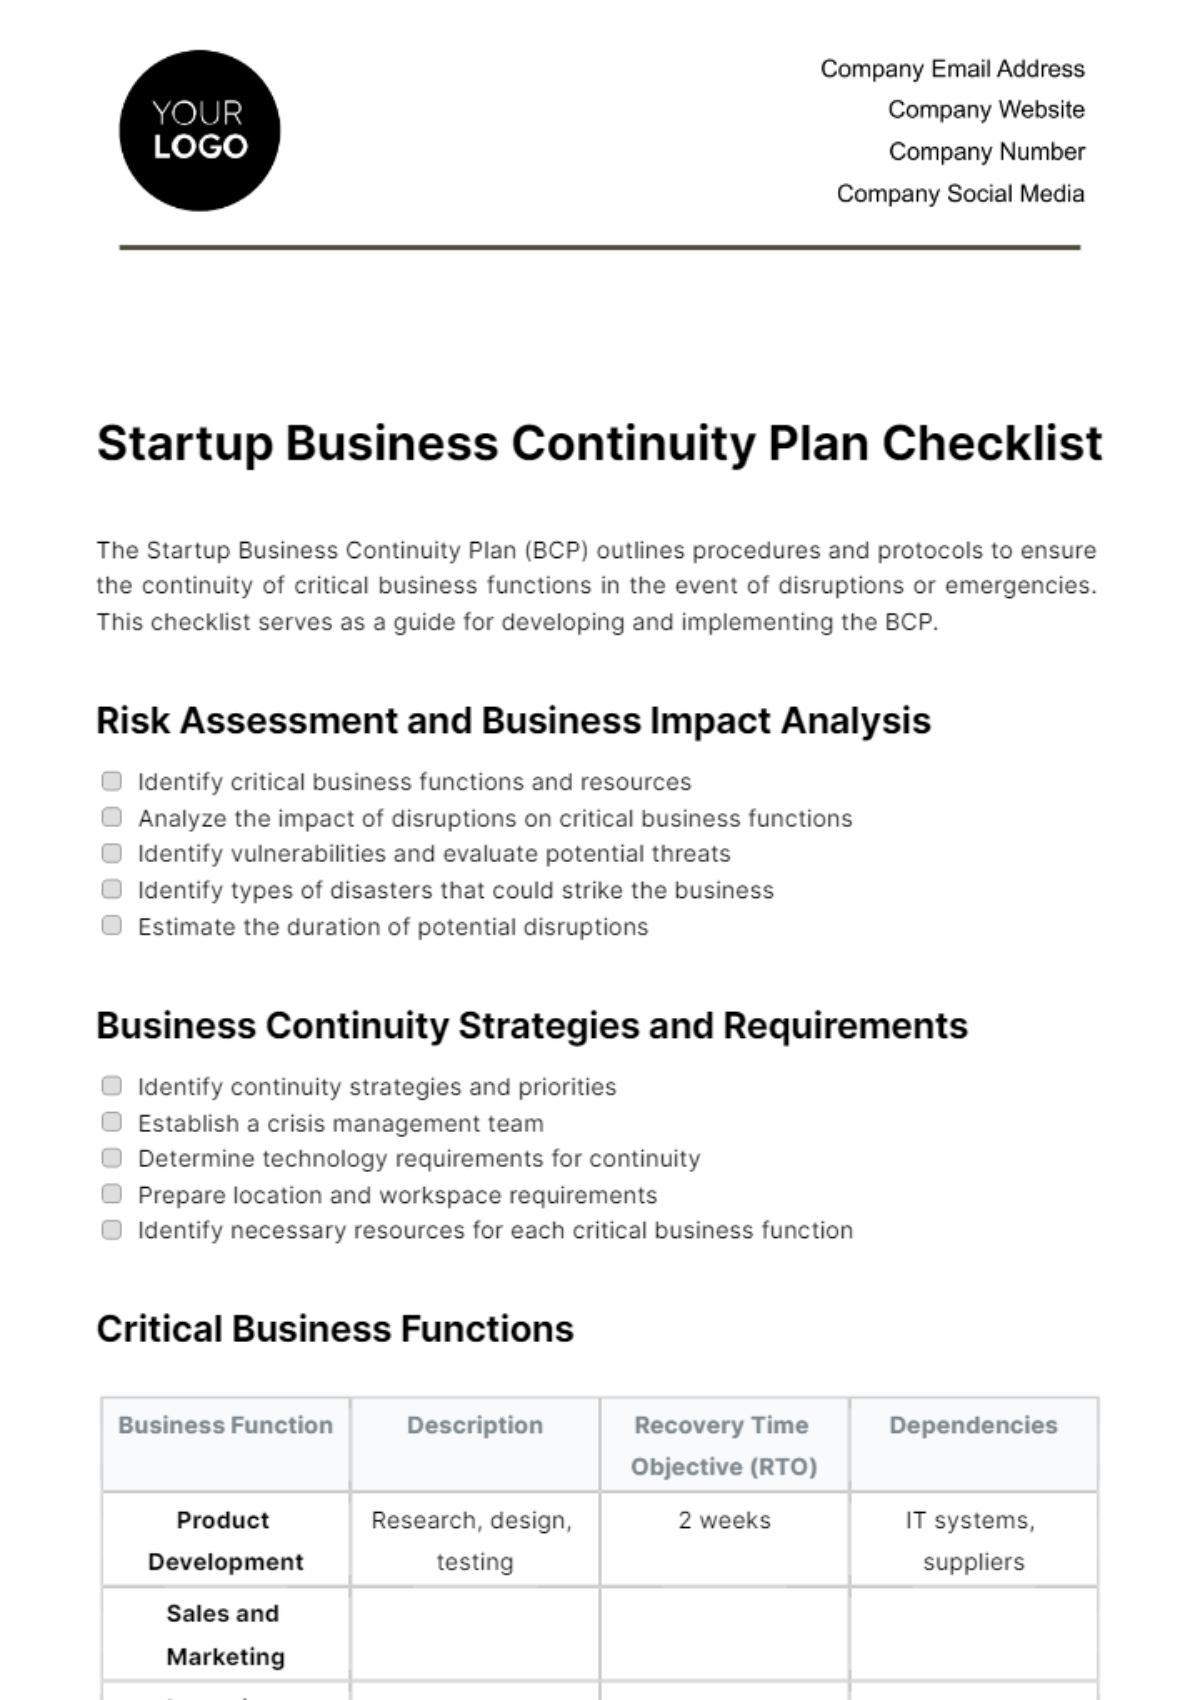 Free Startup Business Continuity Plan Checklist Template